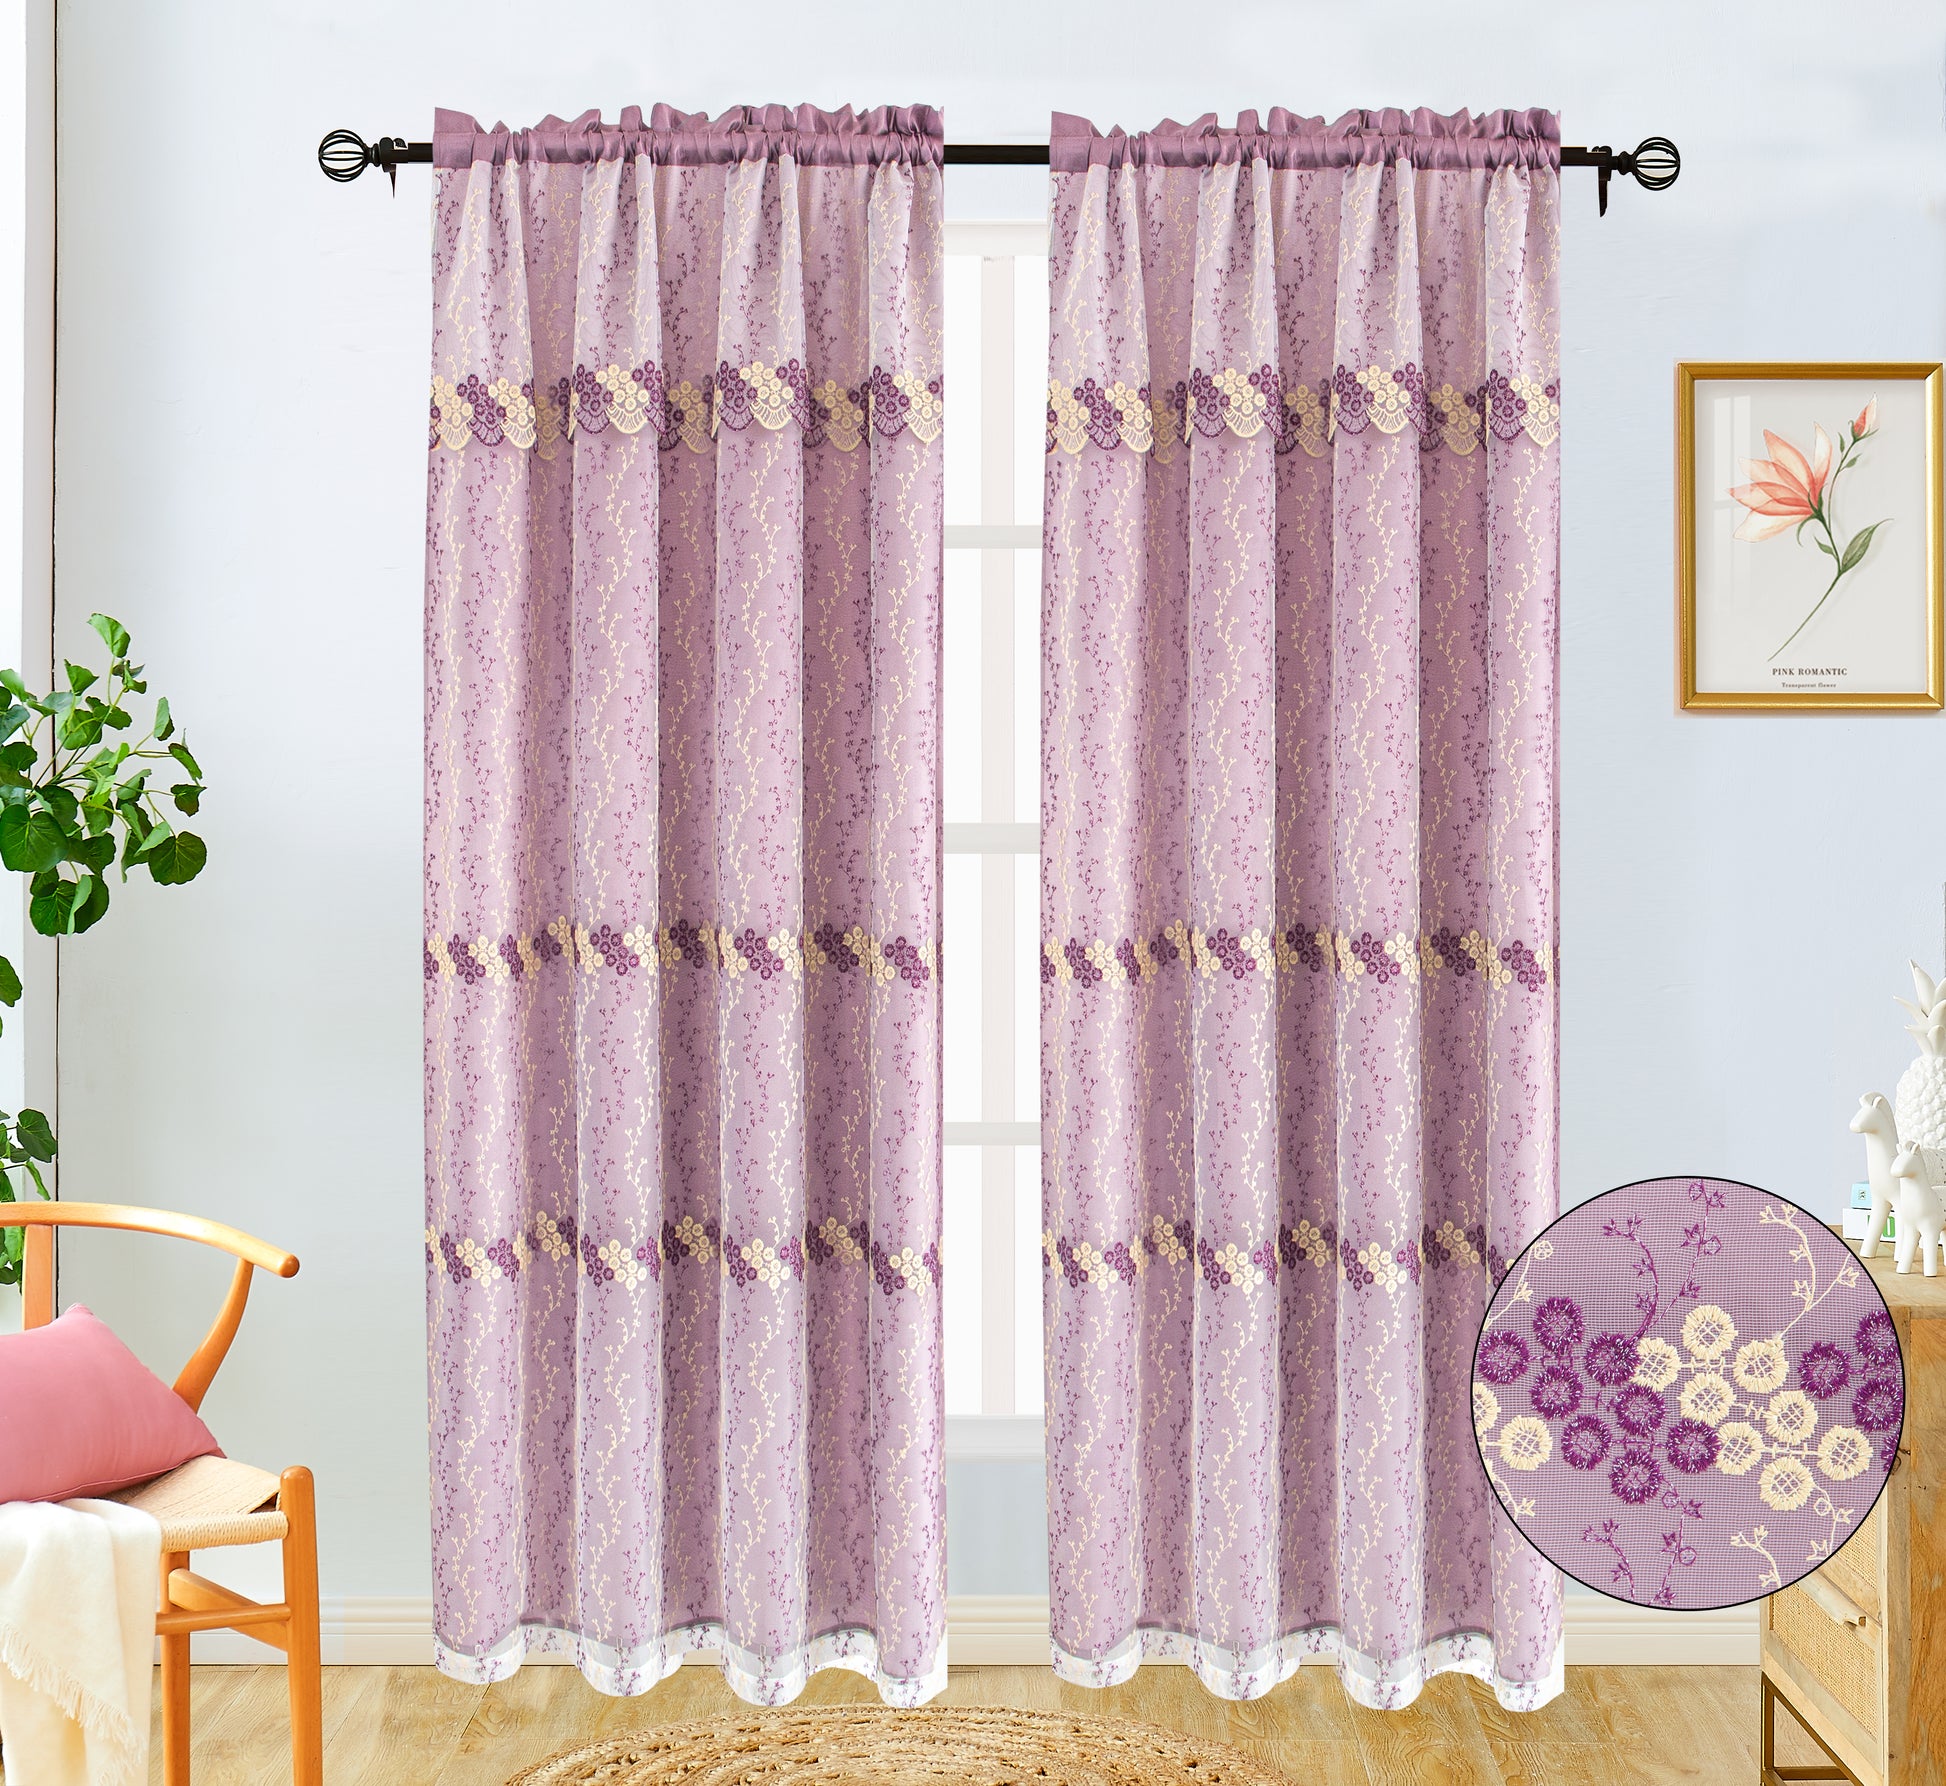 Lulu Voile Rainbow Embroidered Panel with Valance - Glory Home Design